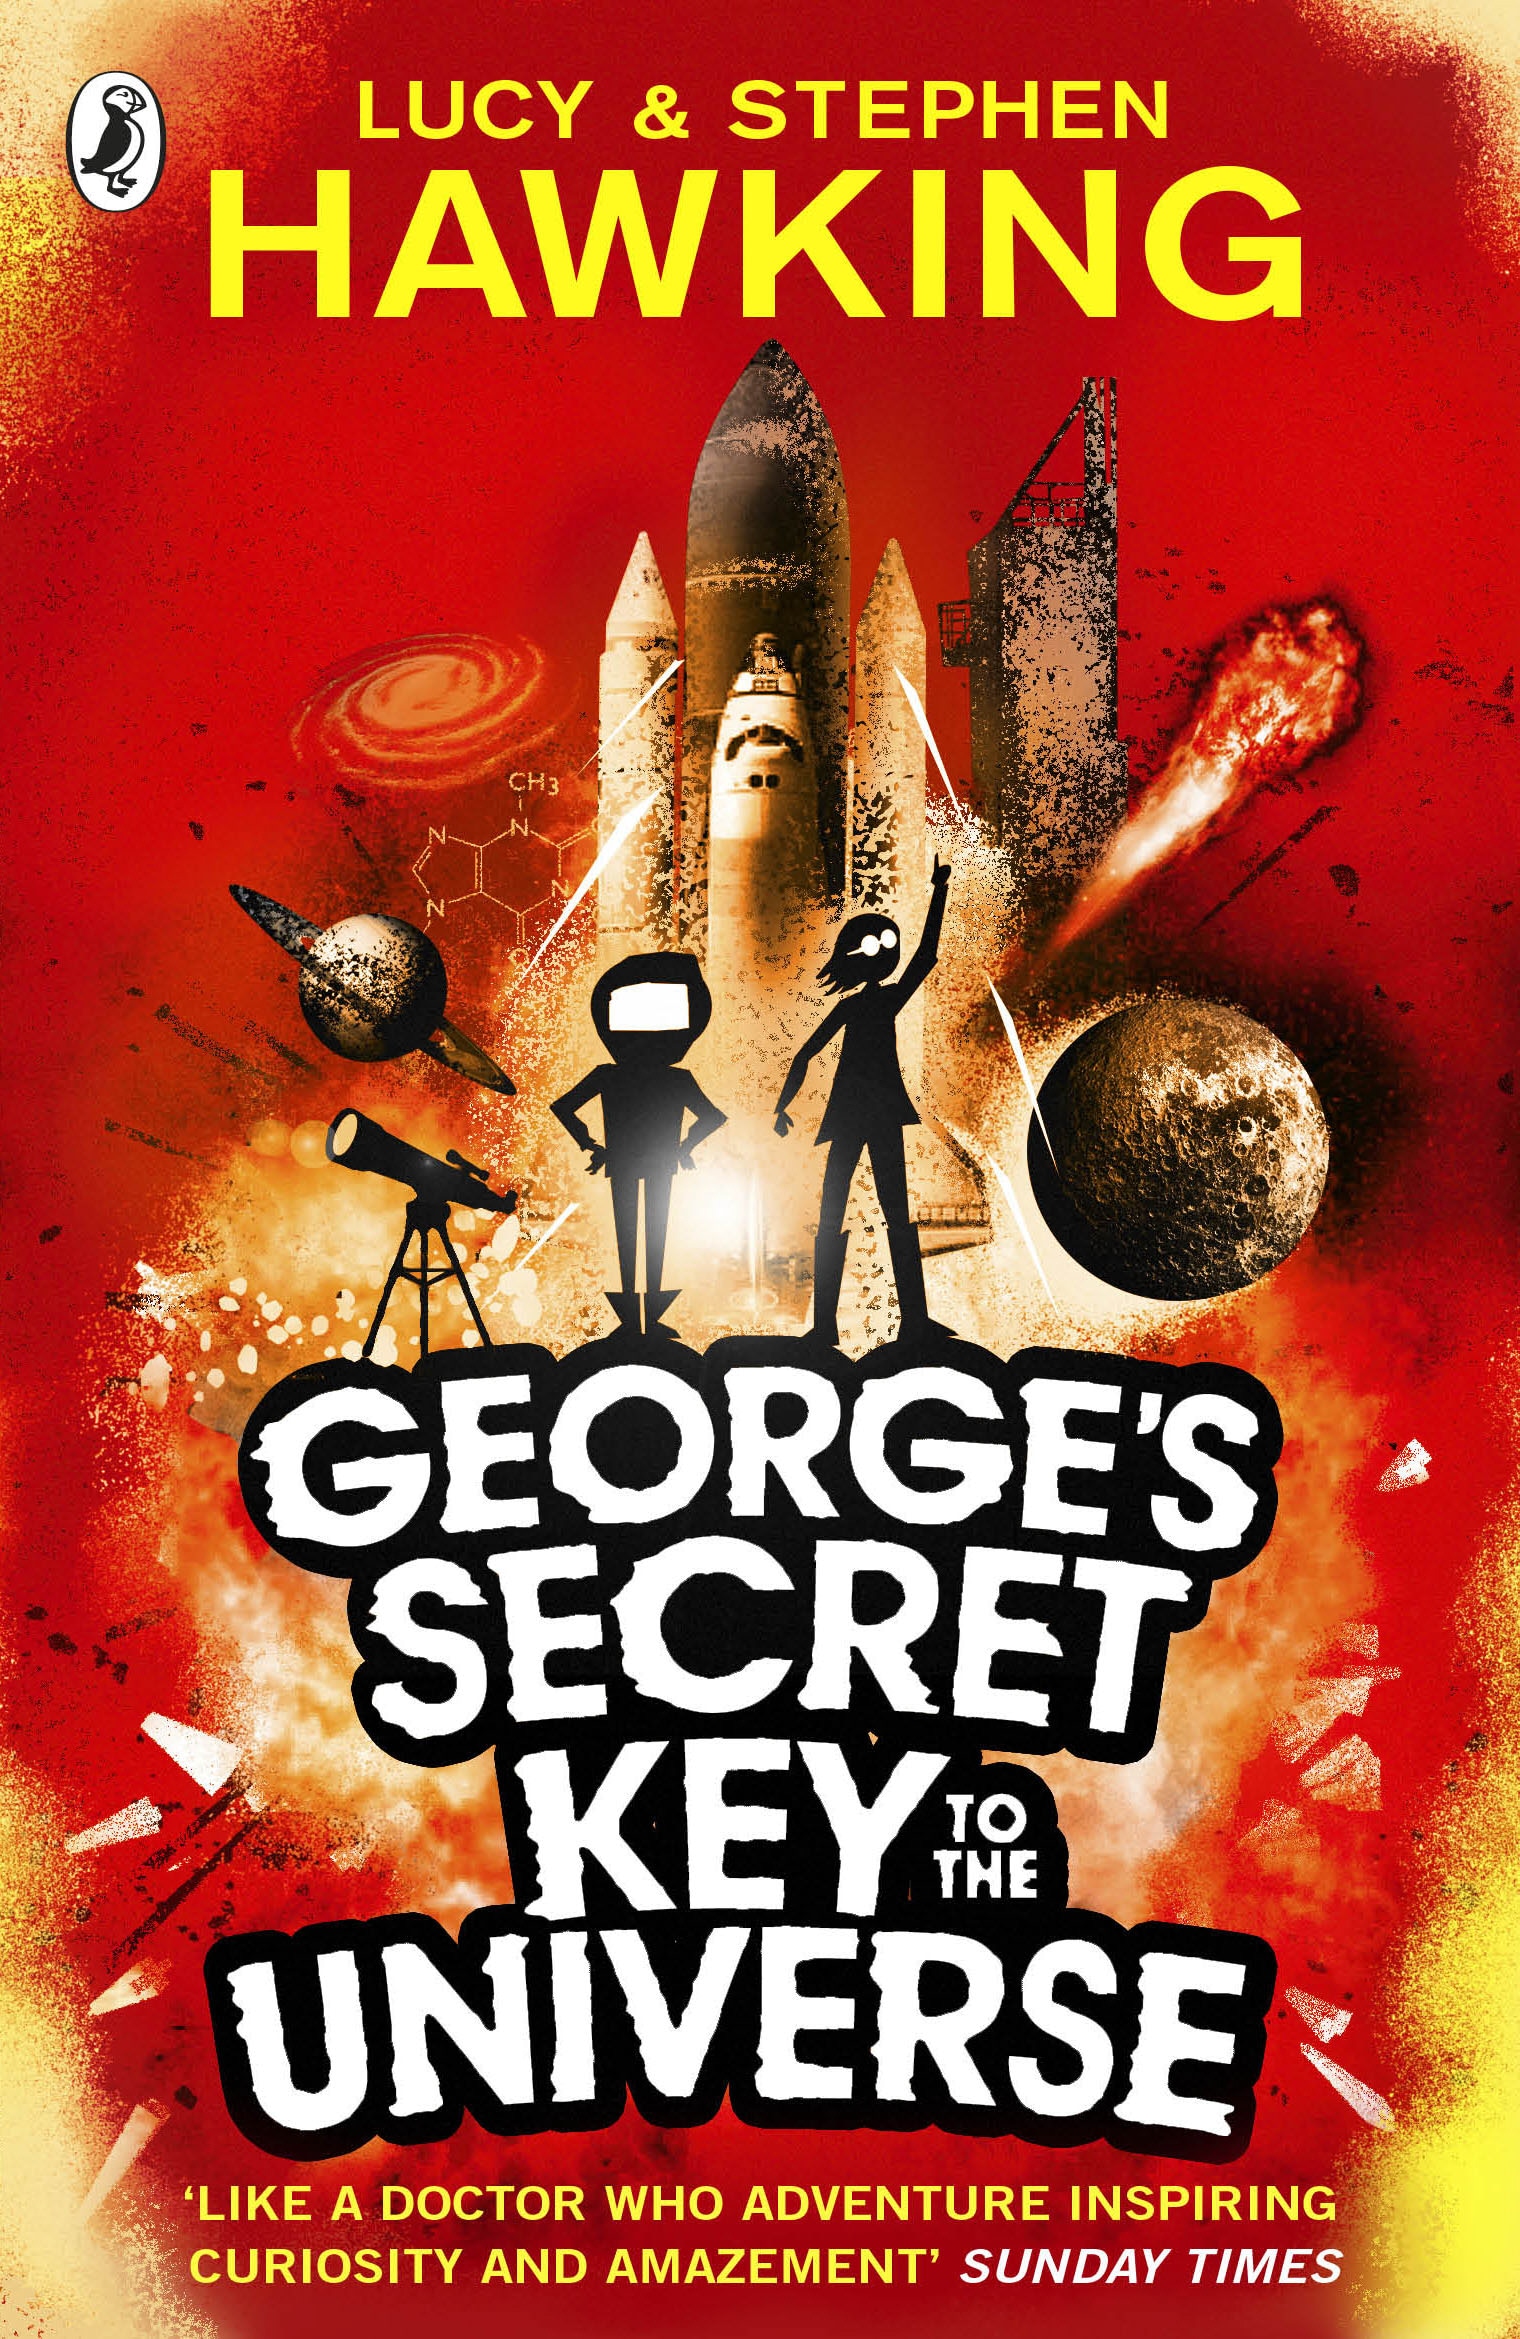 Book “George's Secret Key to the Universe” by Lucy Hawking, Stephen Hawking — August 7, 2008